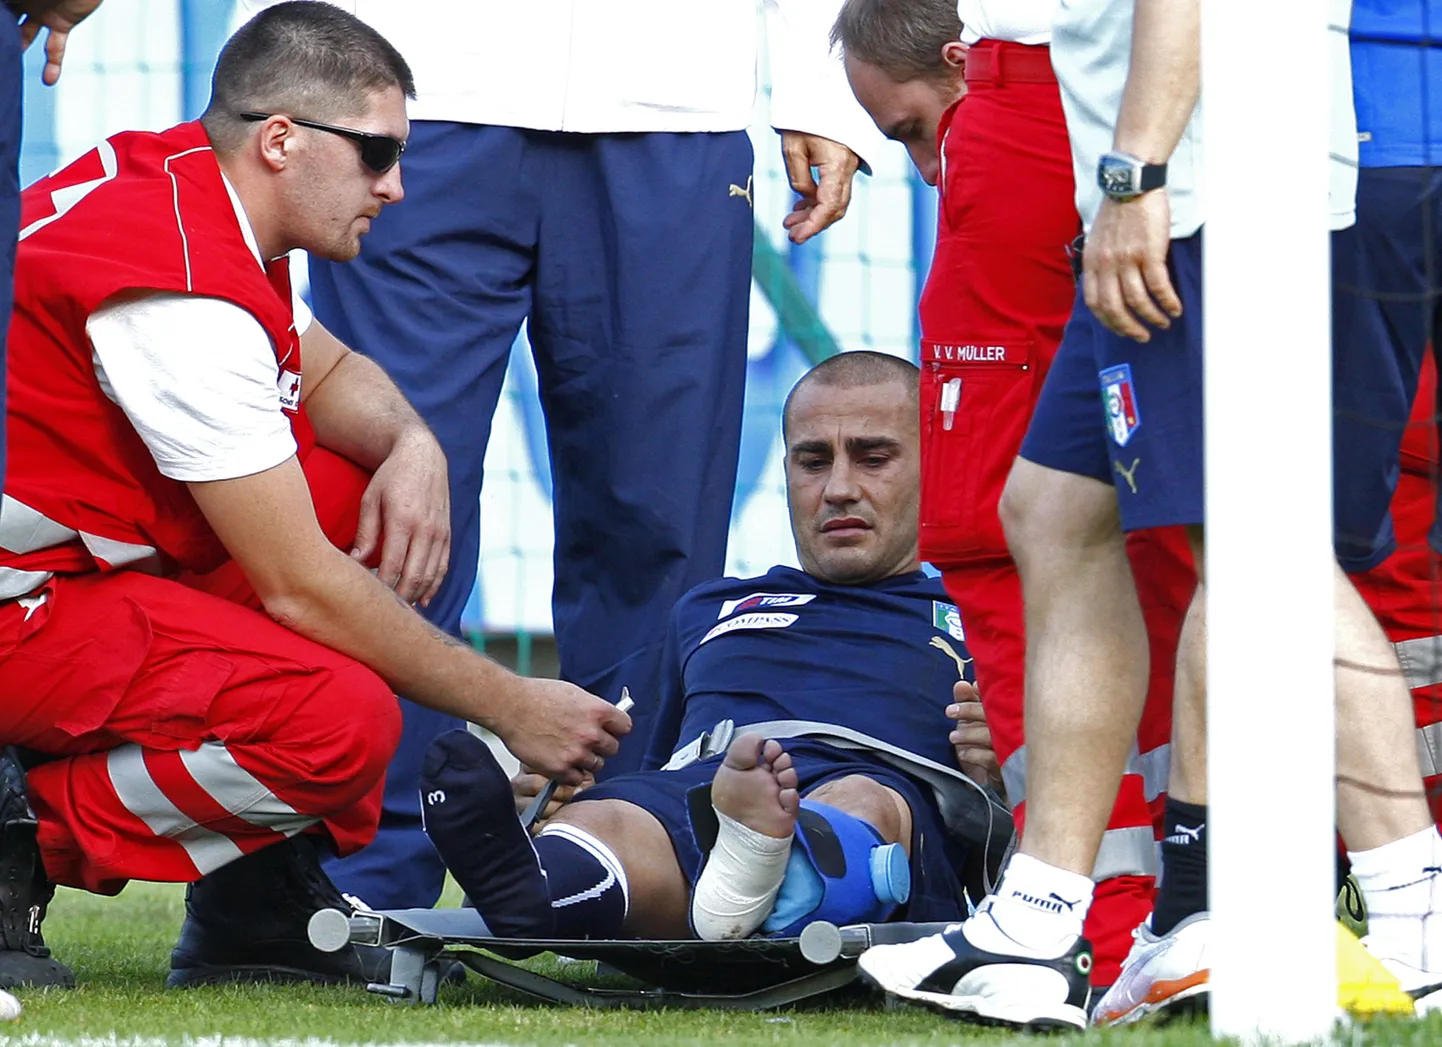 Italy's Fabio Cannavaro lies on the pitch after he was injured during a training session at the Suedstadt stadium in Maria Enzersdorf June 2, 2008. (EURO 2008 Preview) REUTERS/Tony Gentile (AUSTRIA)